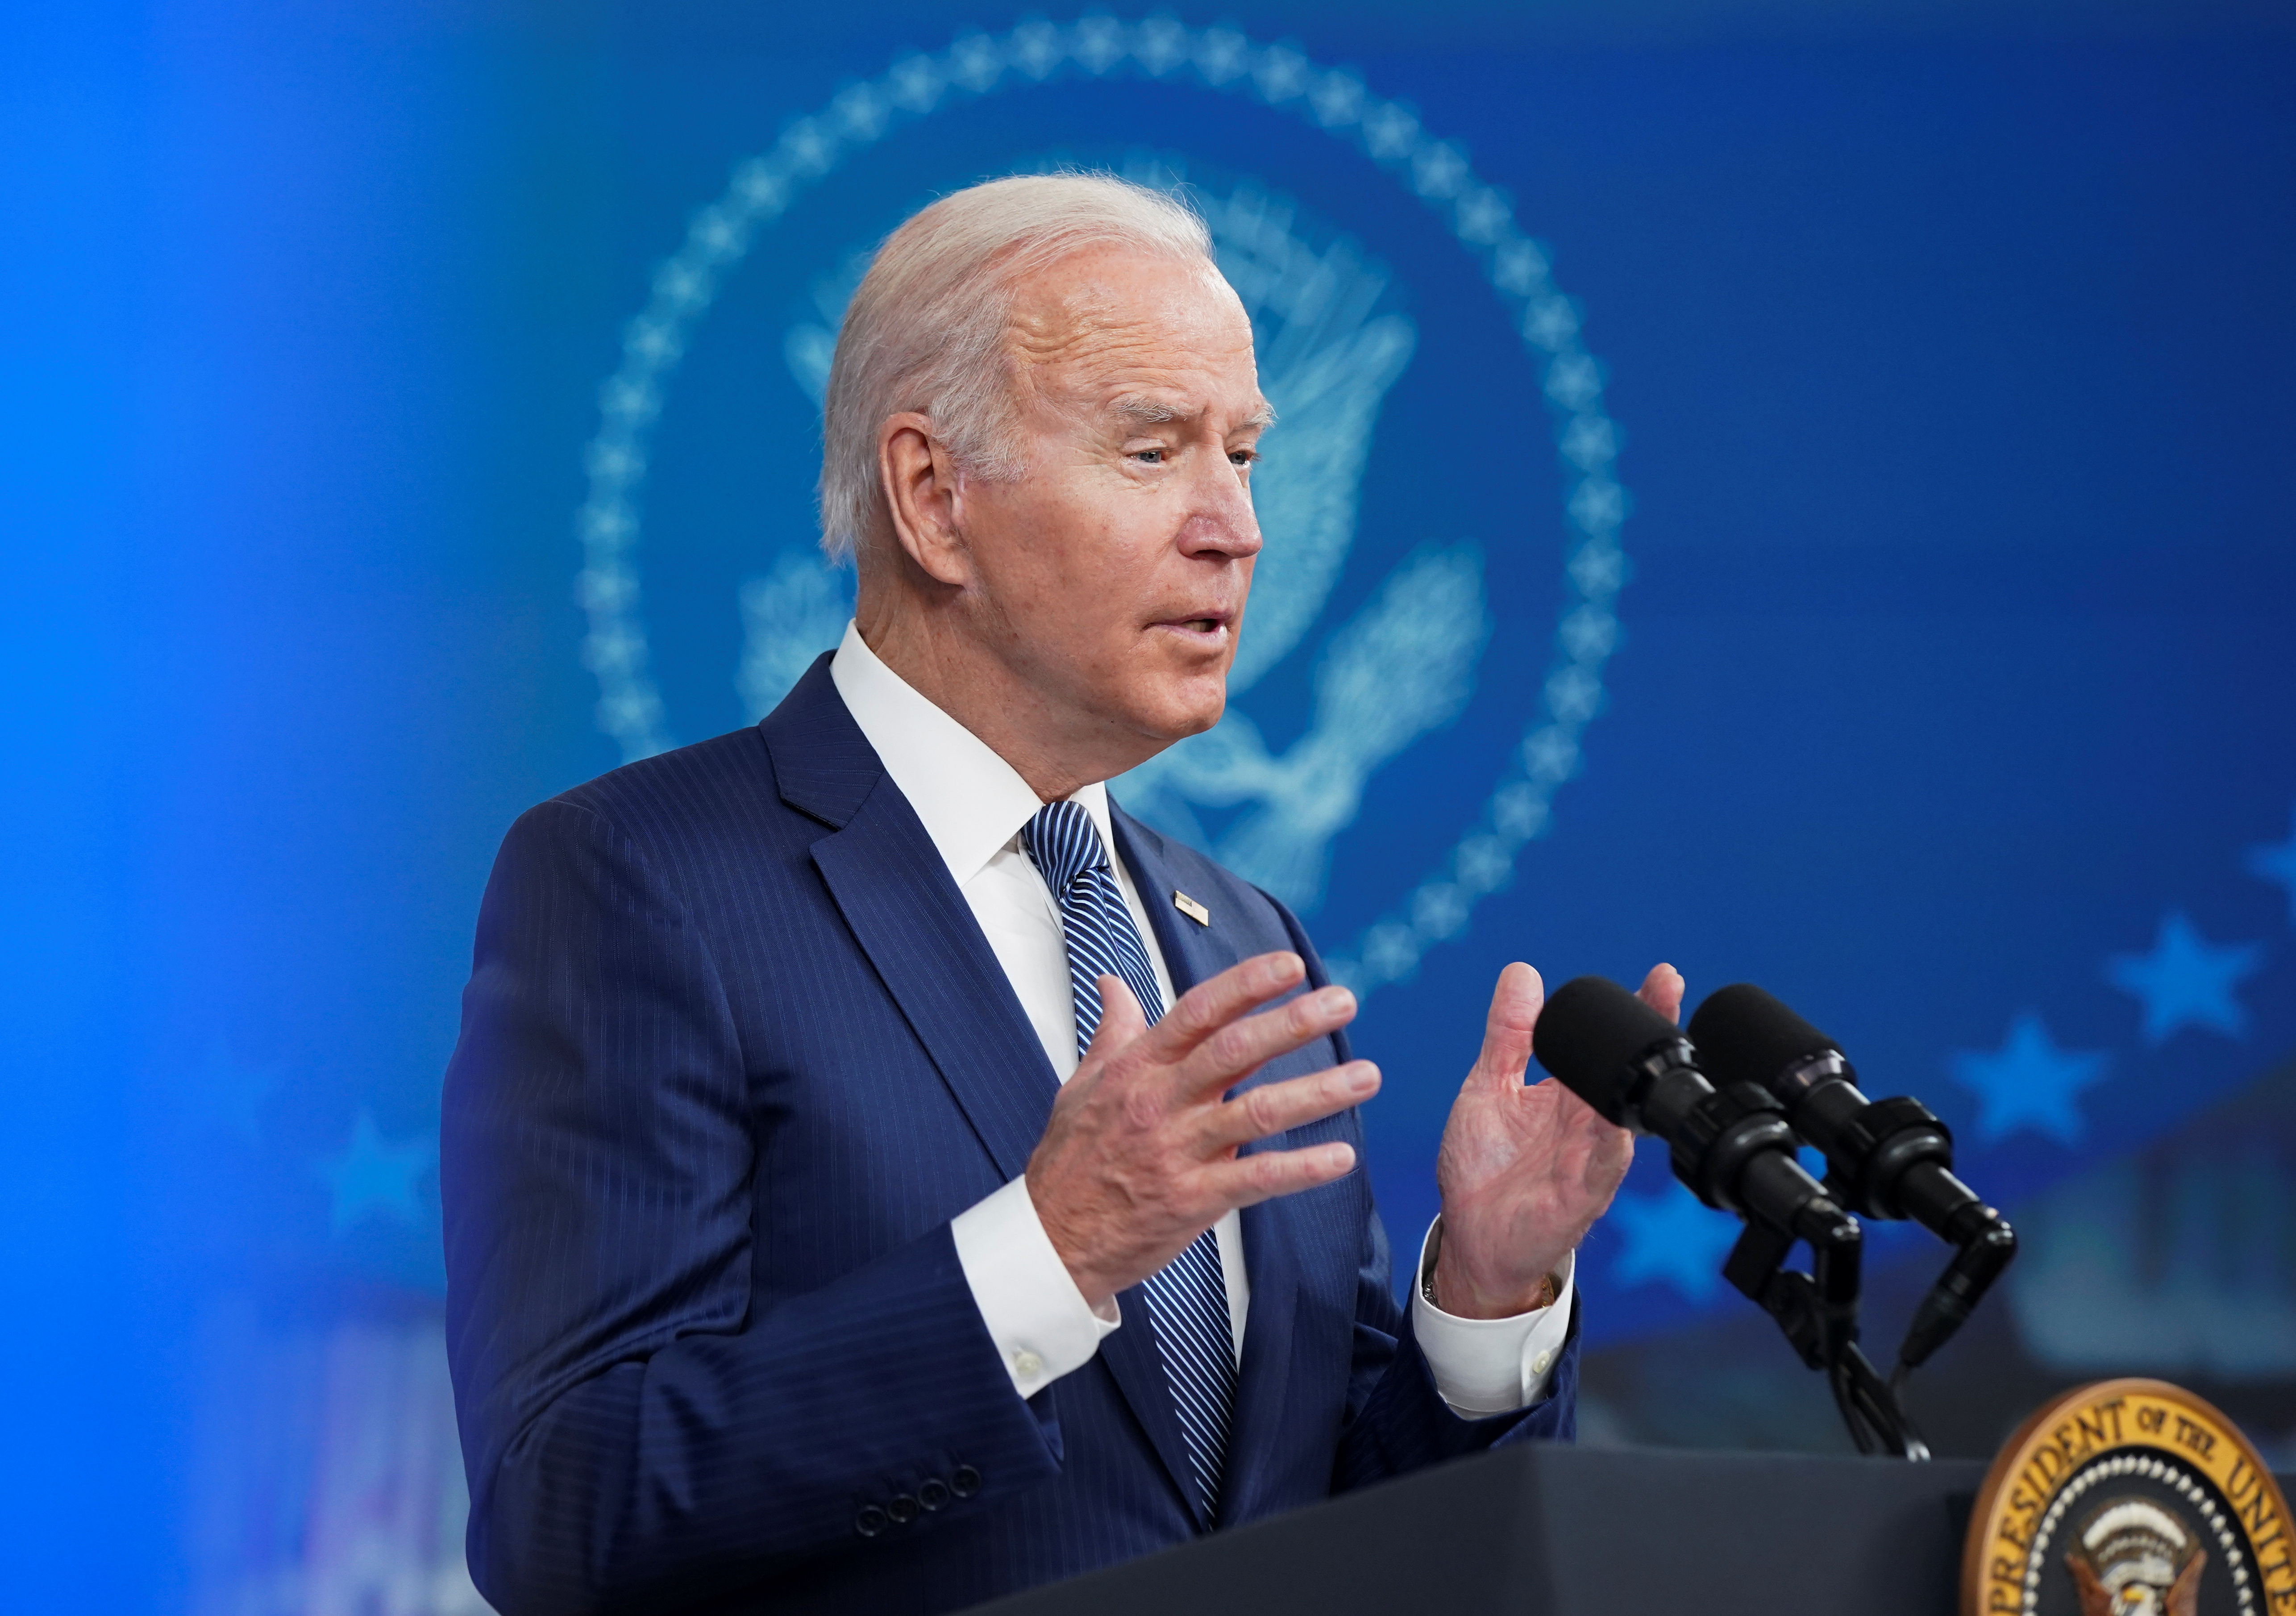 U.S. President Joe Biden speaks about his administration's efforts to ease supply chain issues during the holiday season, at the White House in Washington, U.S., December 1, 2021. REUTERS/Kevin Lamarque